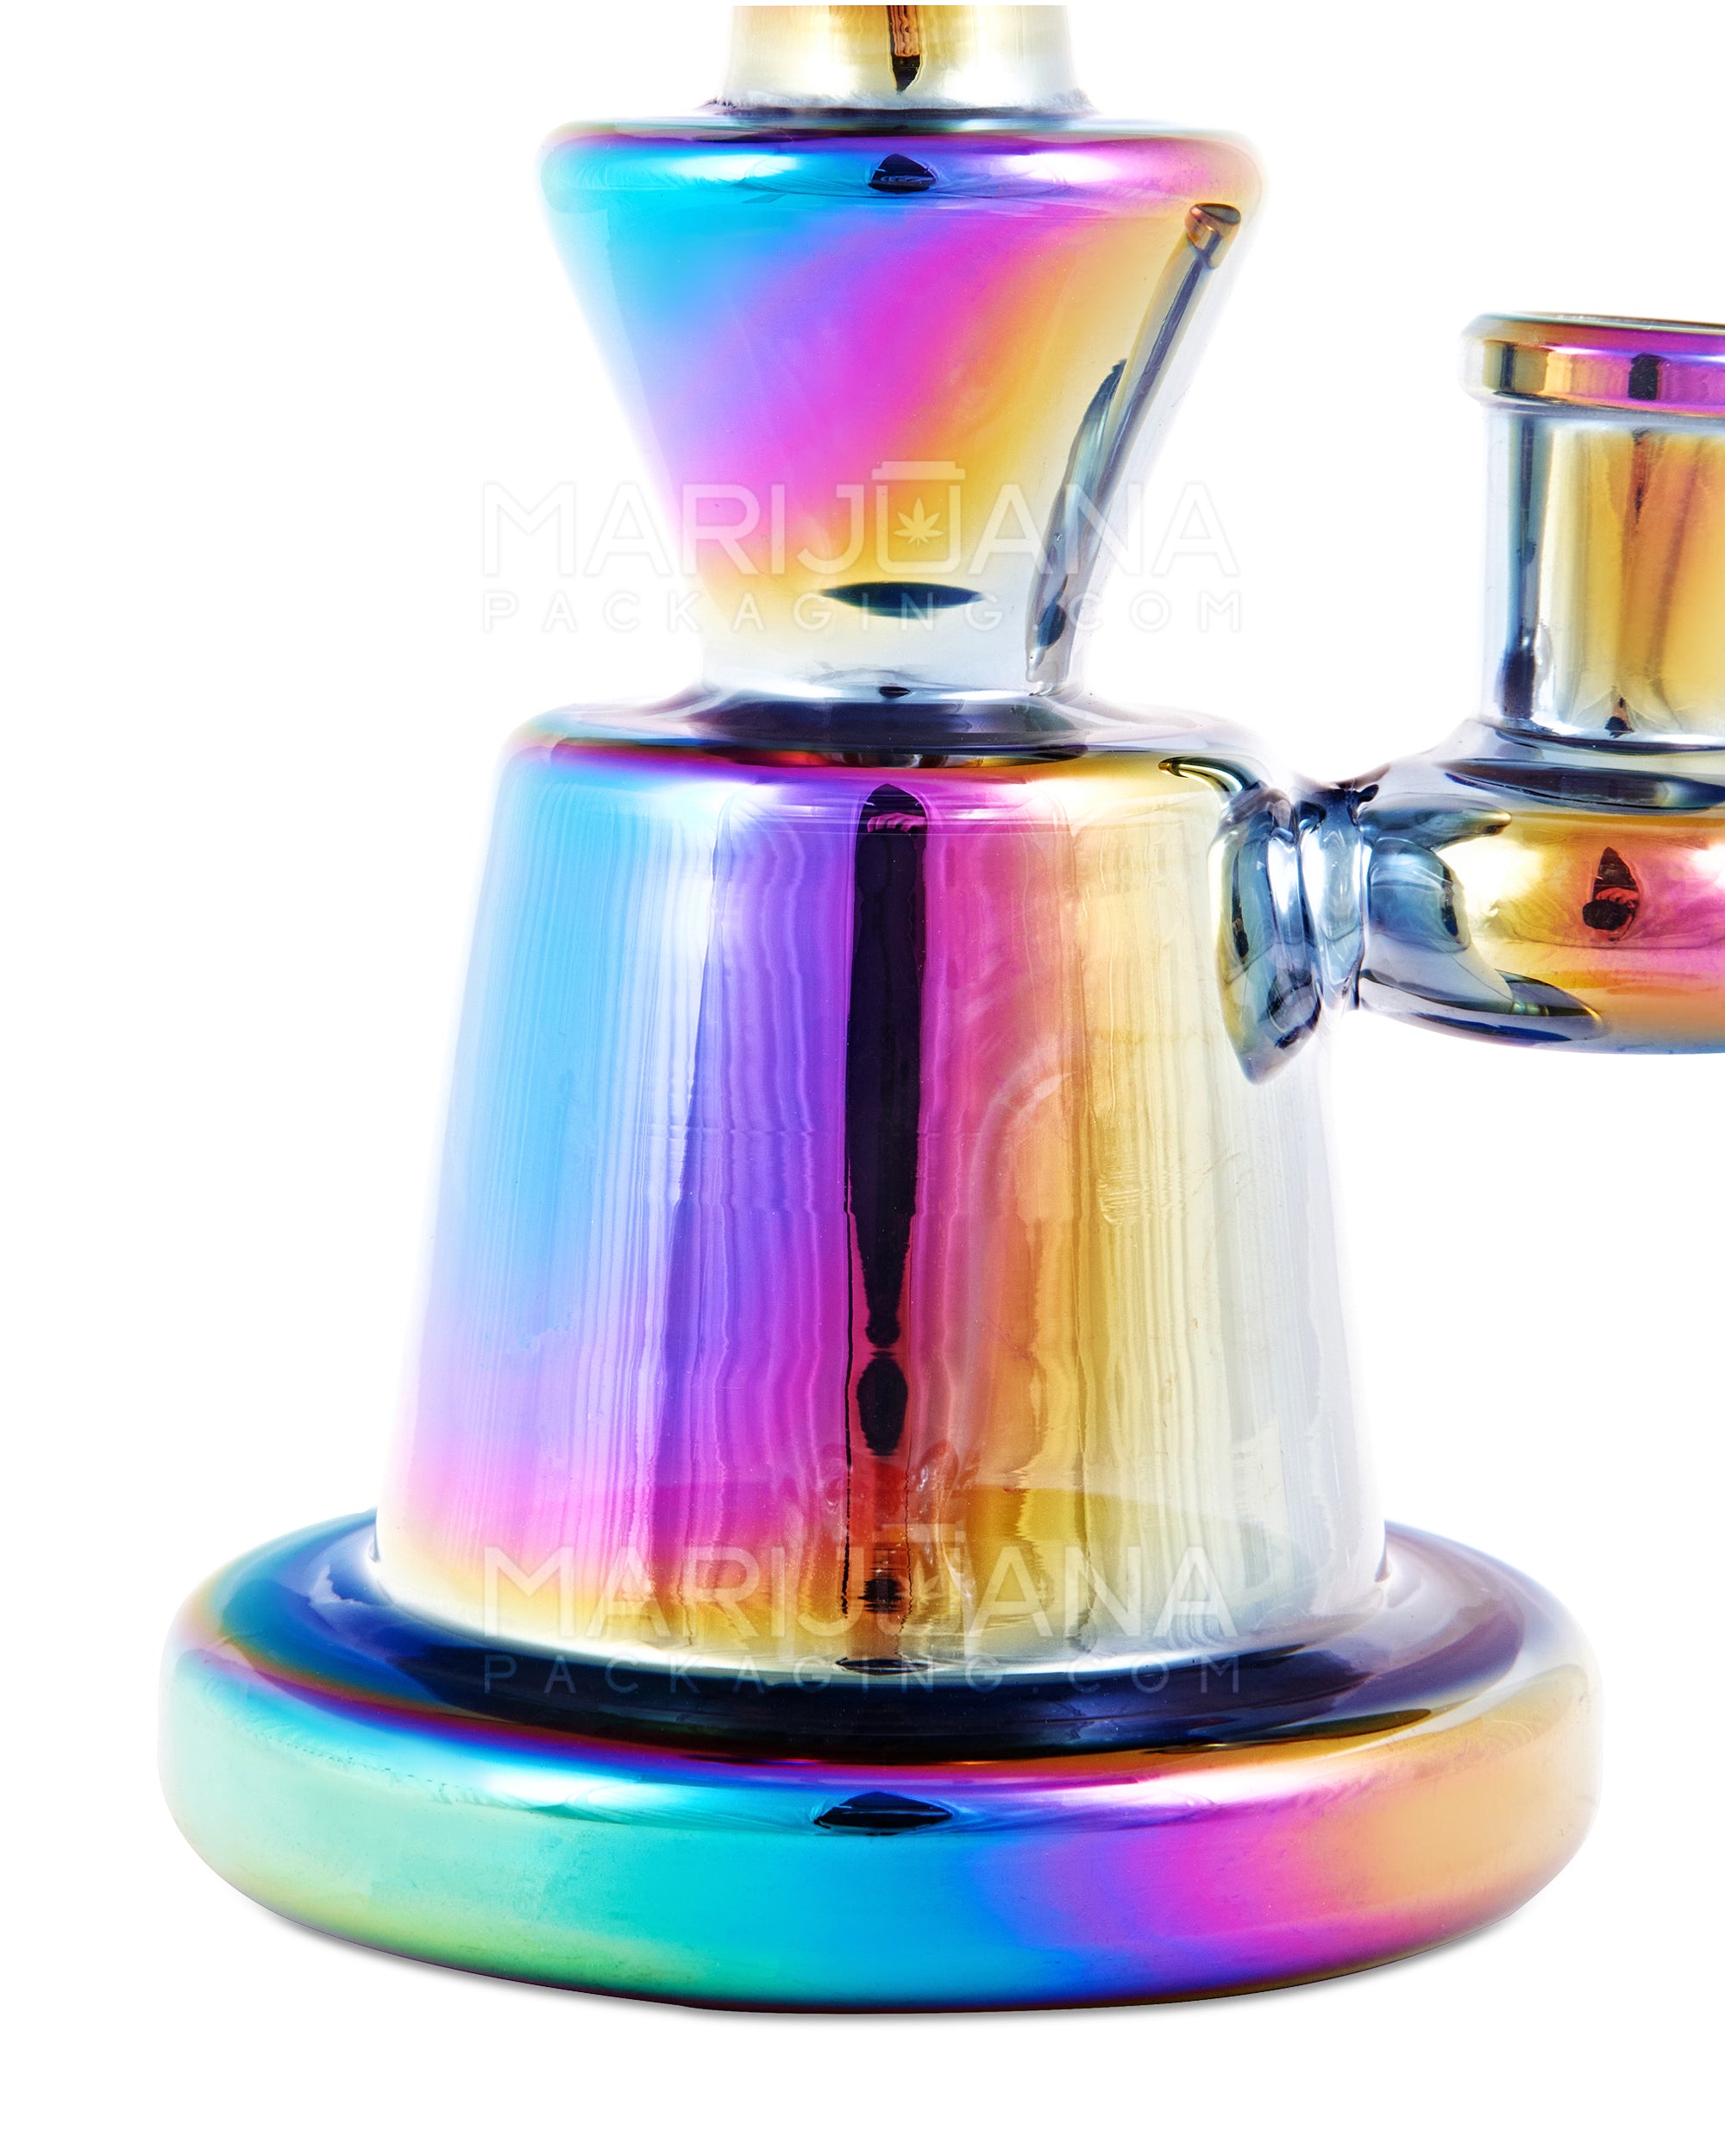 Bent Neck Iridescent Glass Baker Dab Rig | 6in Tall - 14mm Banger - Rainbow - 3